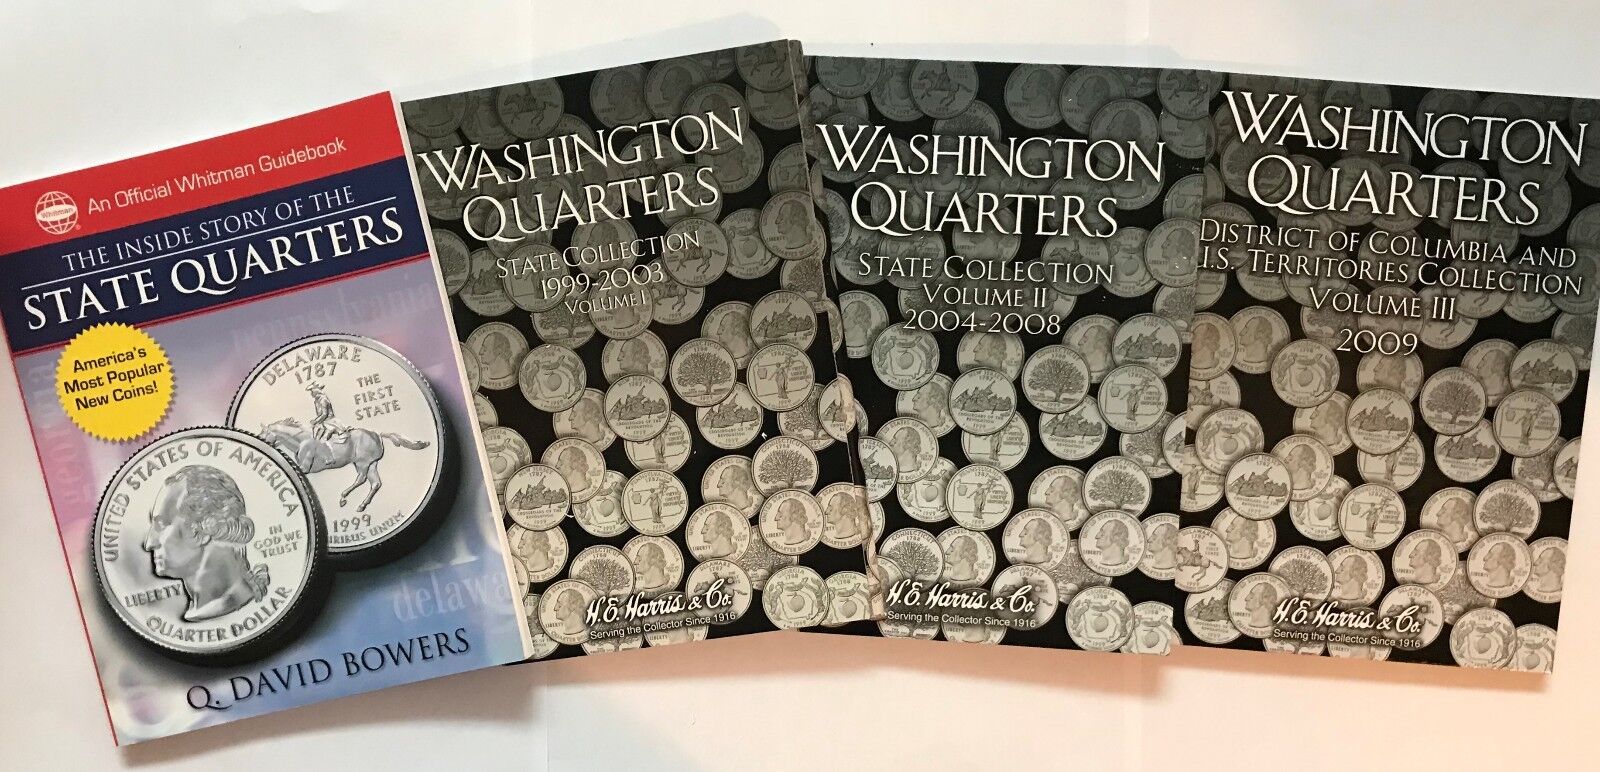 P & D QUARTERS (1999-2009) 3 FOLDERS & THE INSIDE STORY OF THE STATE QUARTERS  Whitman